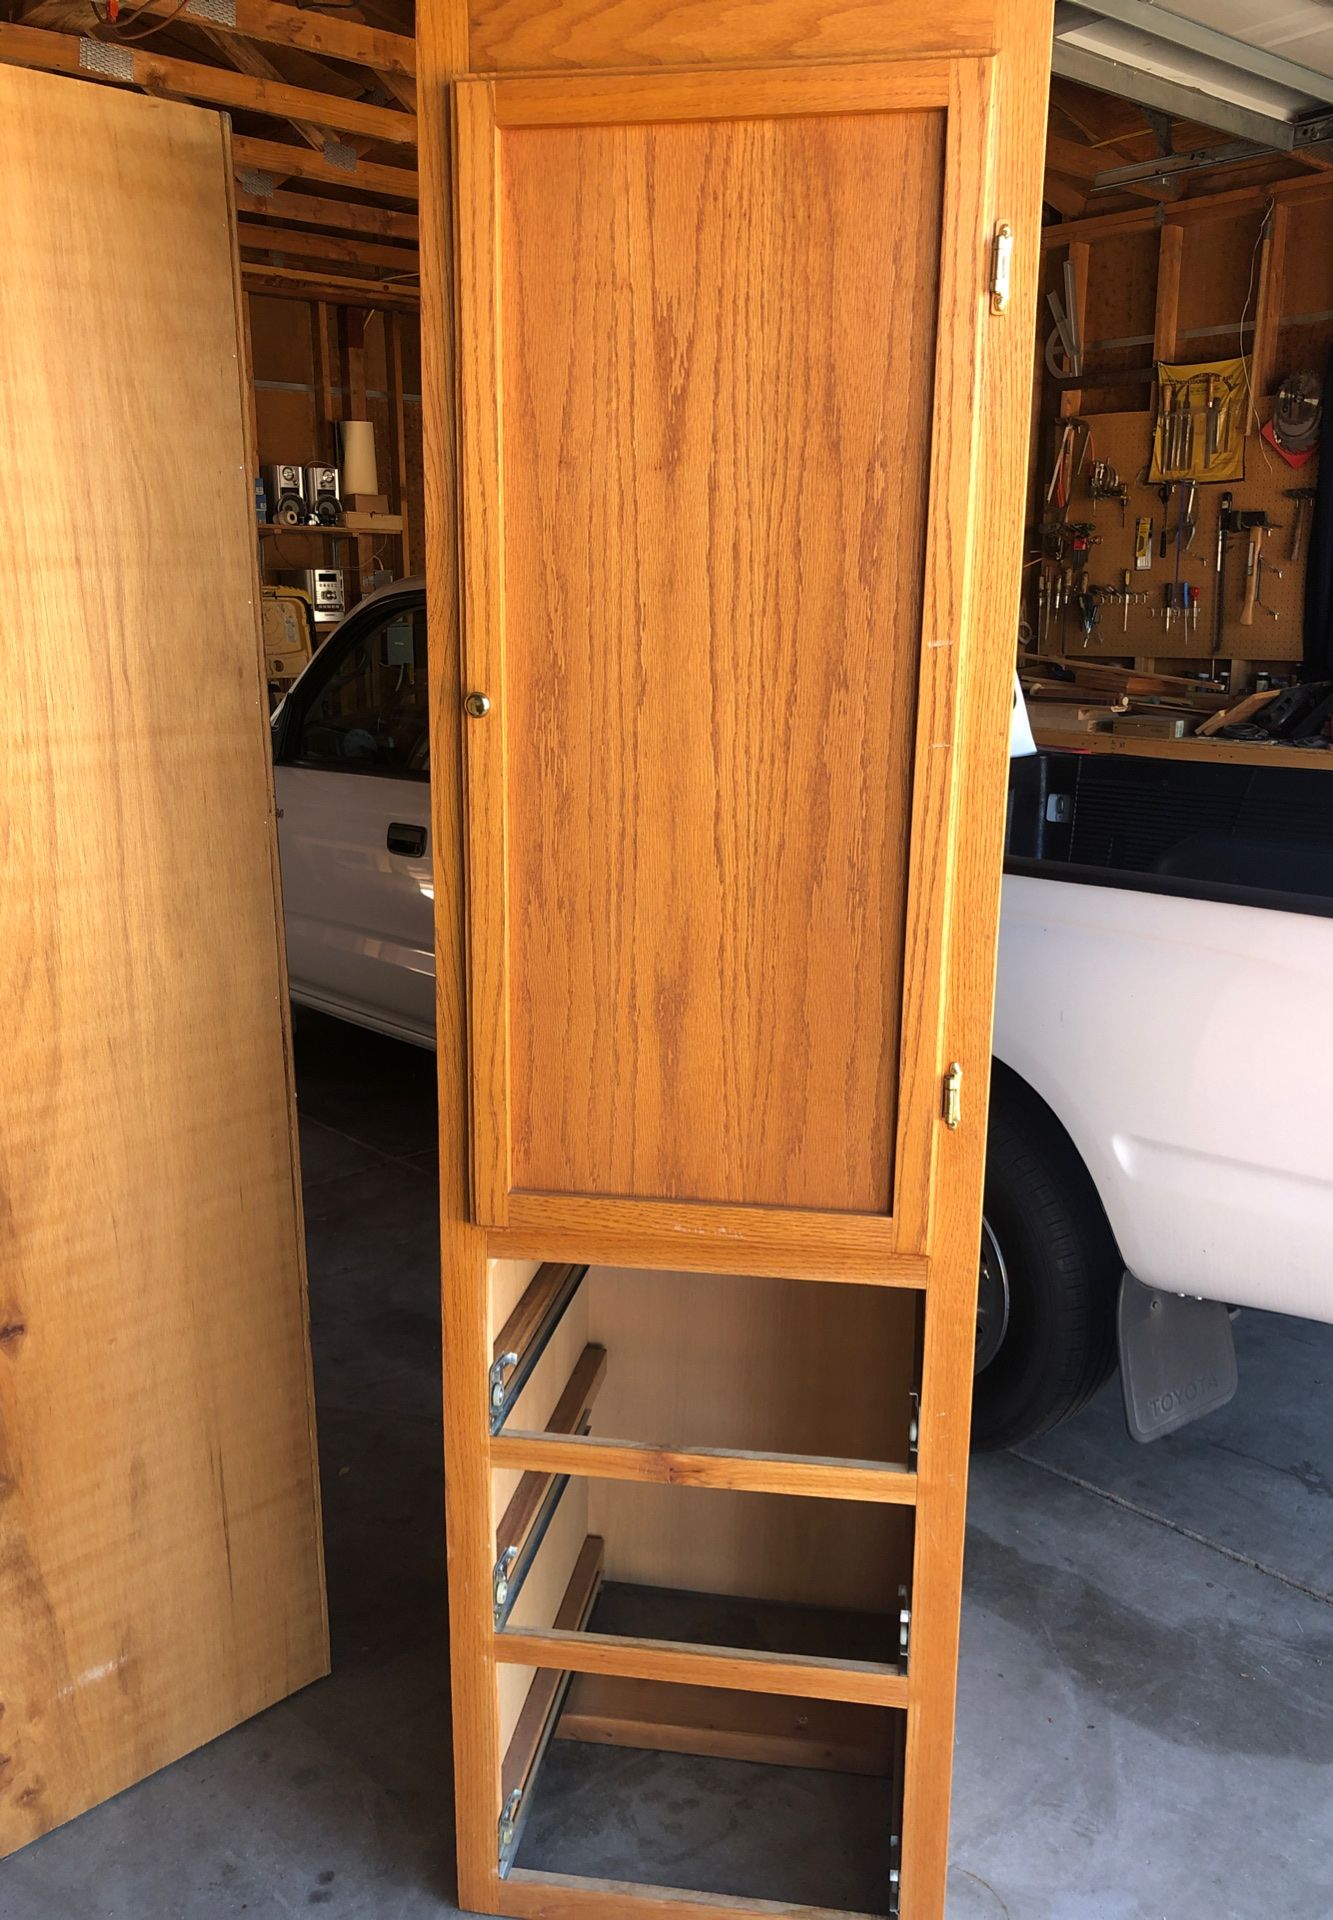 Two shelving units free to whoever wants to come pick them up. All the drawers slide in nicely for a total of six. 85x25x22. Yours free! Come on by